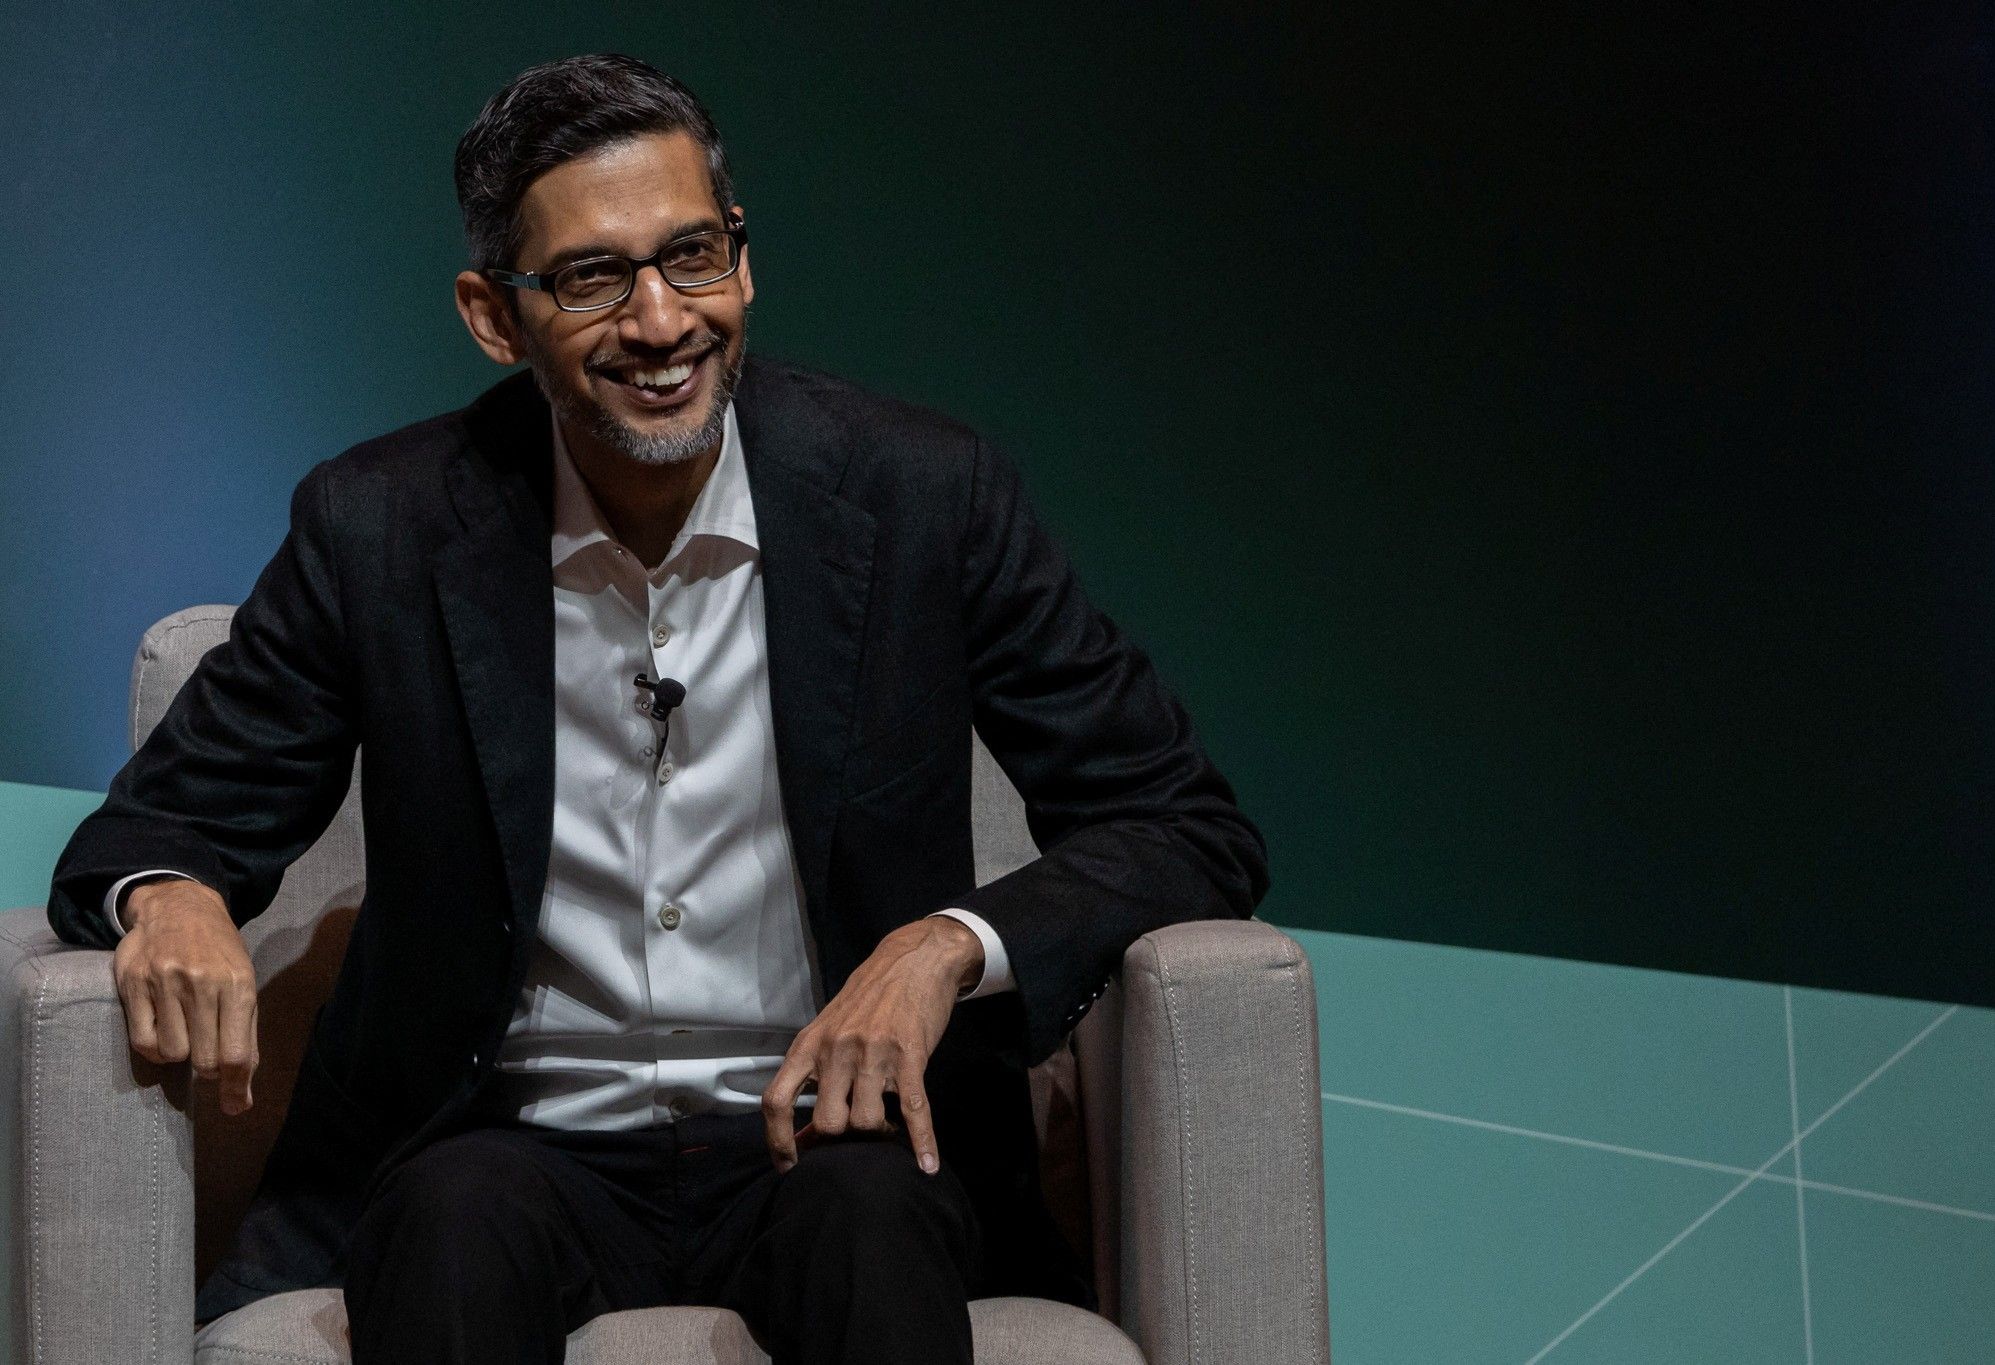 Sundar Pichai, CEO of Google and Alphabet Inc, is pictured on-stage at the 2024 Business, Government, and Society Forum at the Stanford Graduate School of Business in Stanford, California